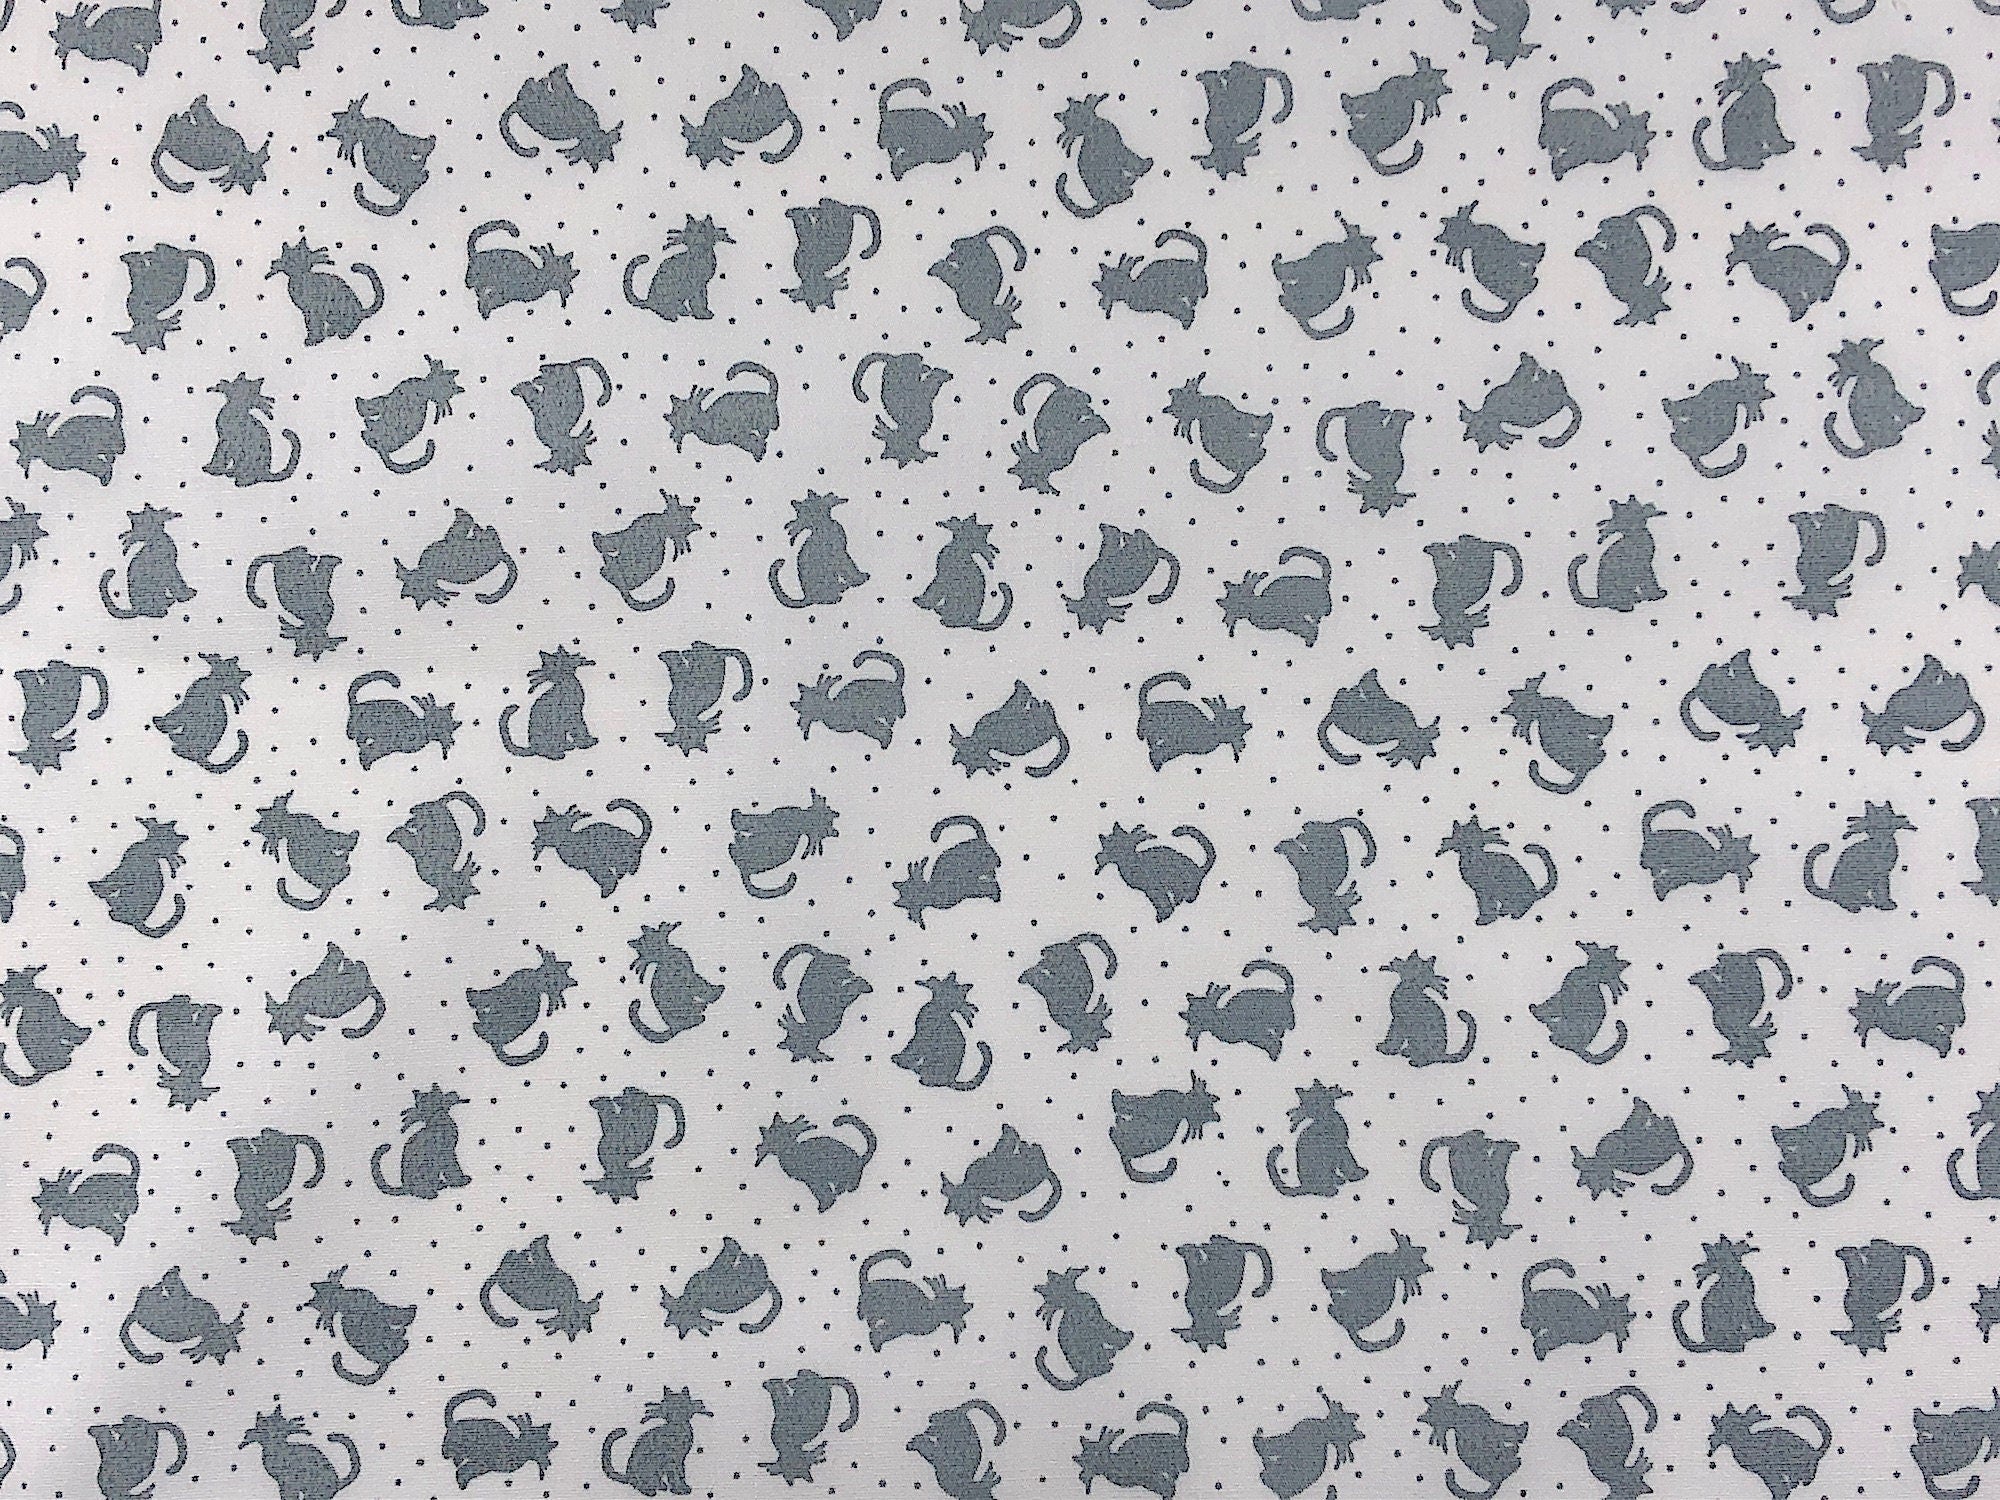 Grey cats on a white background that also has small grey dots.